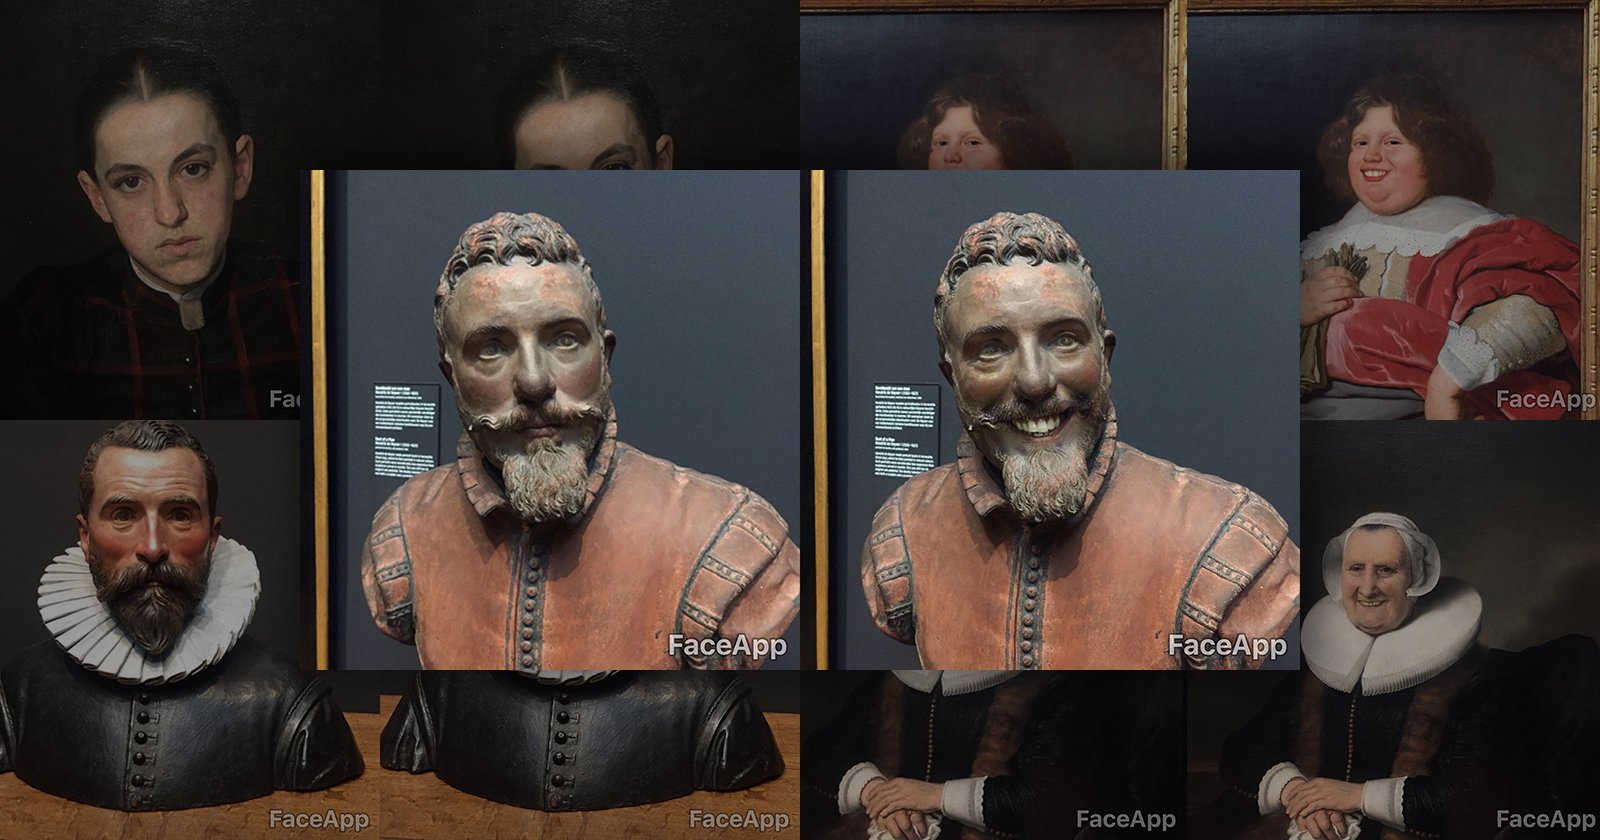 Designer Makes Paintings and Statues Smile at the Museum with FaceApp